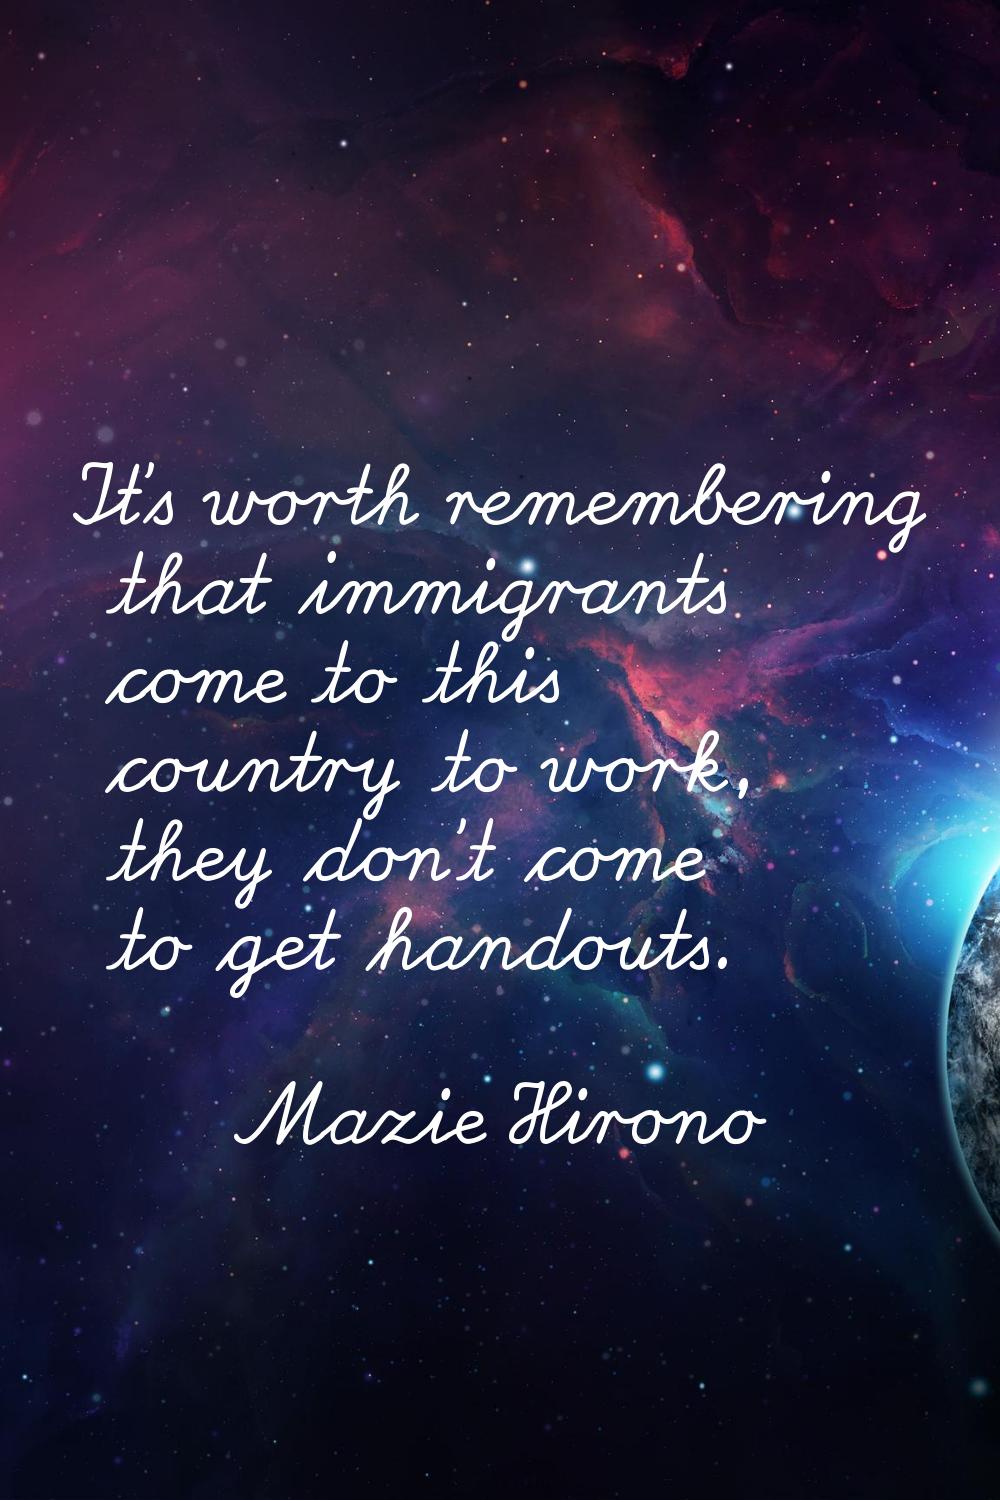 It's worth remembering that immigrants come to this country to work, they don't come to get handout